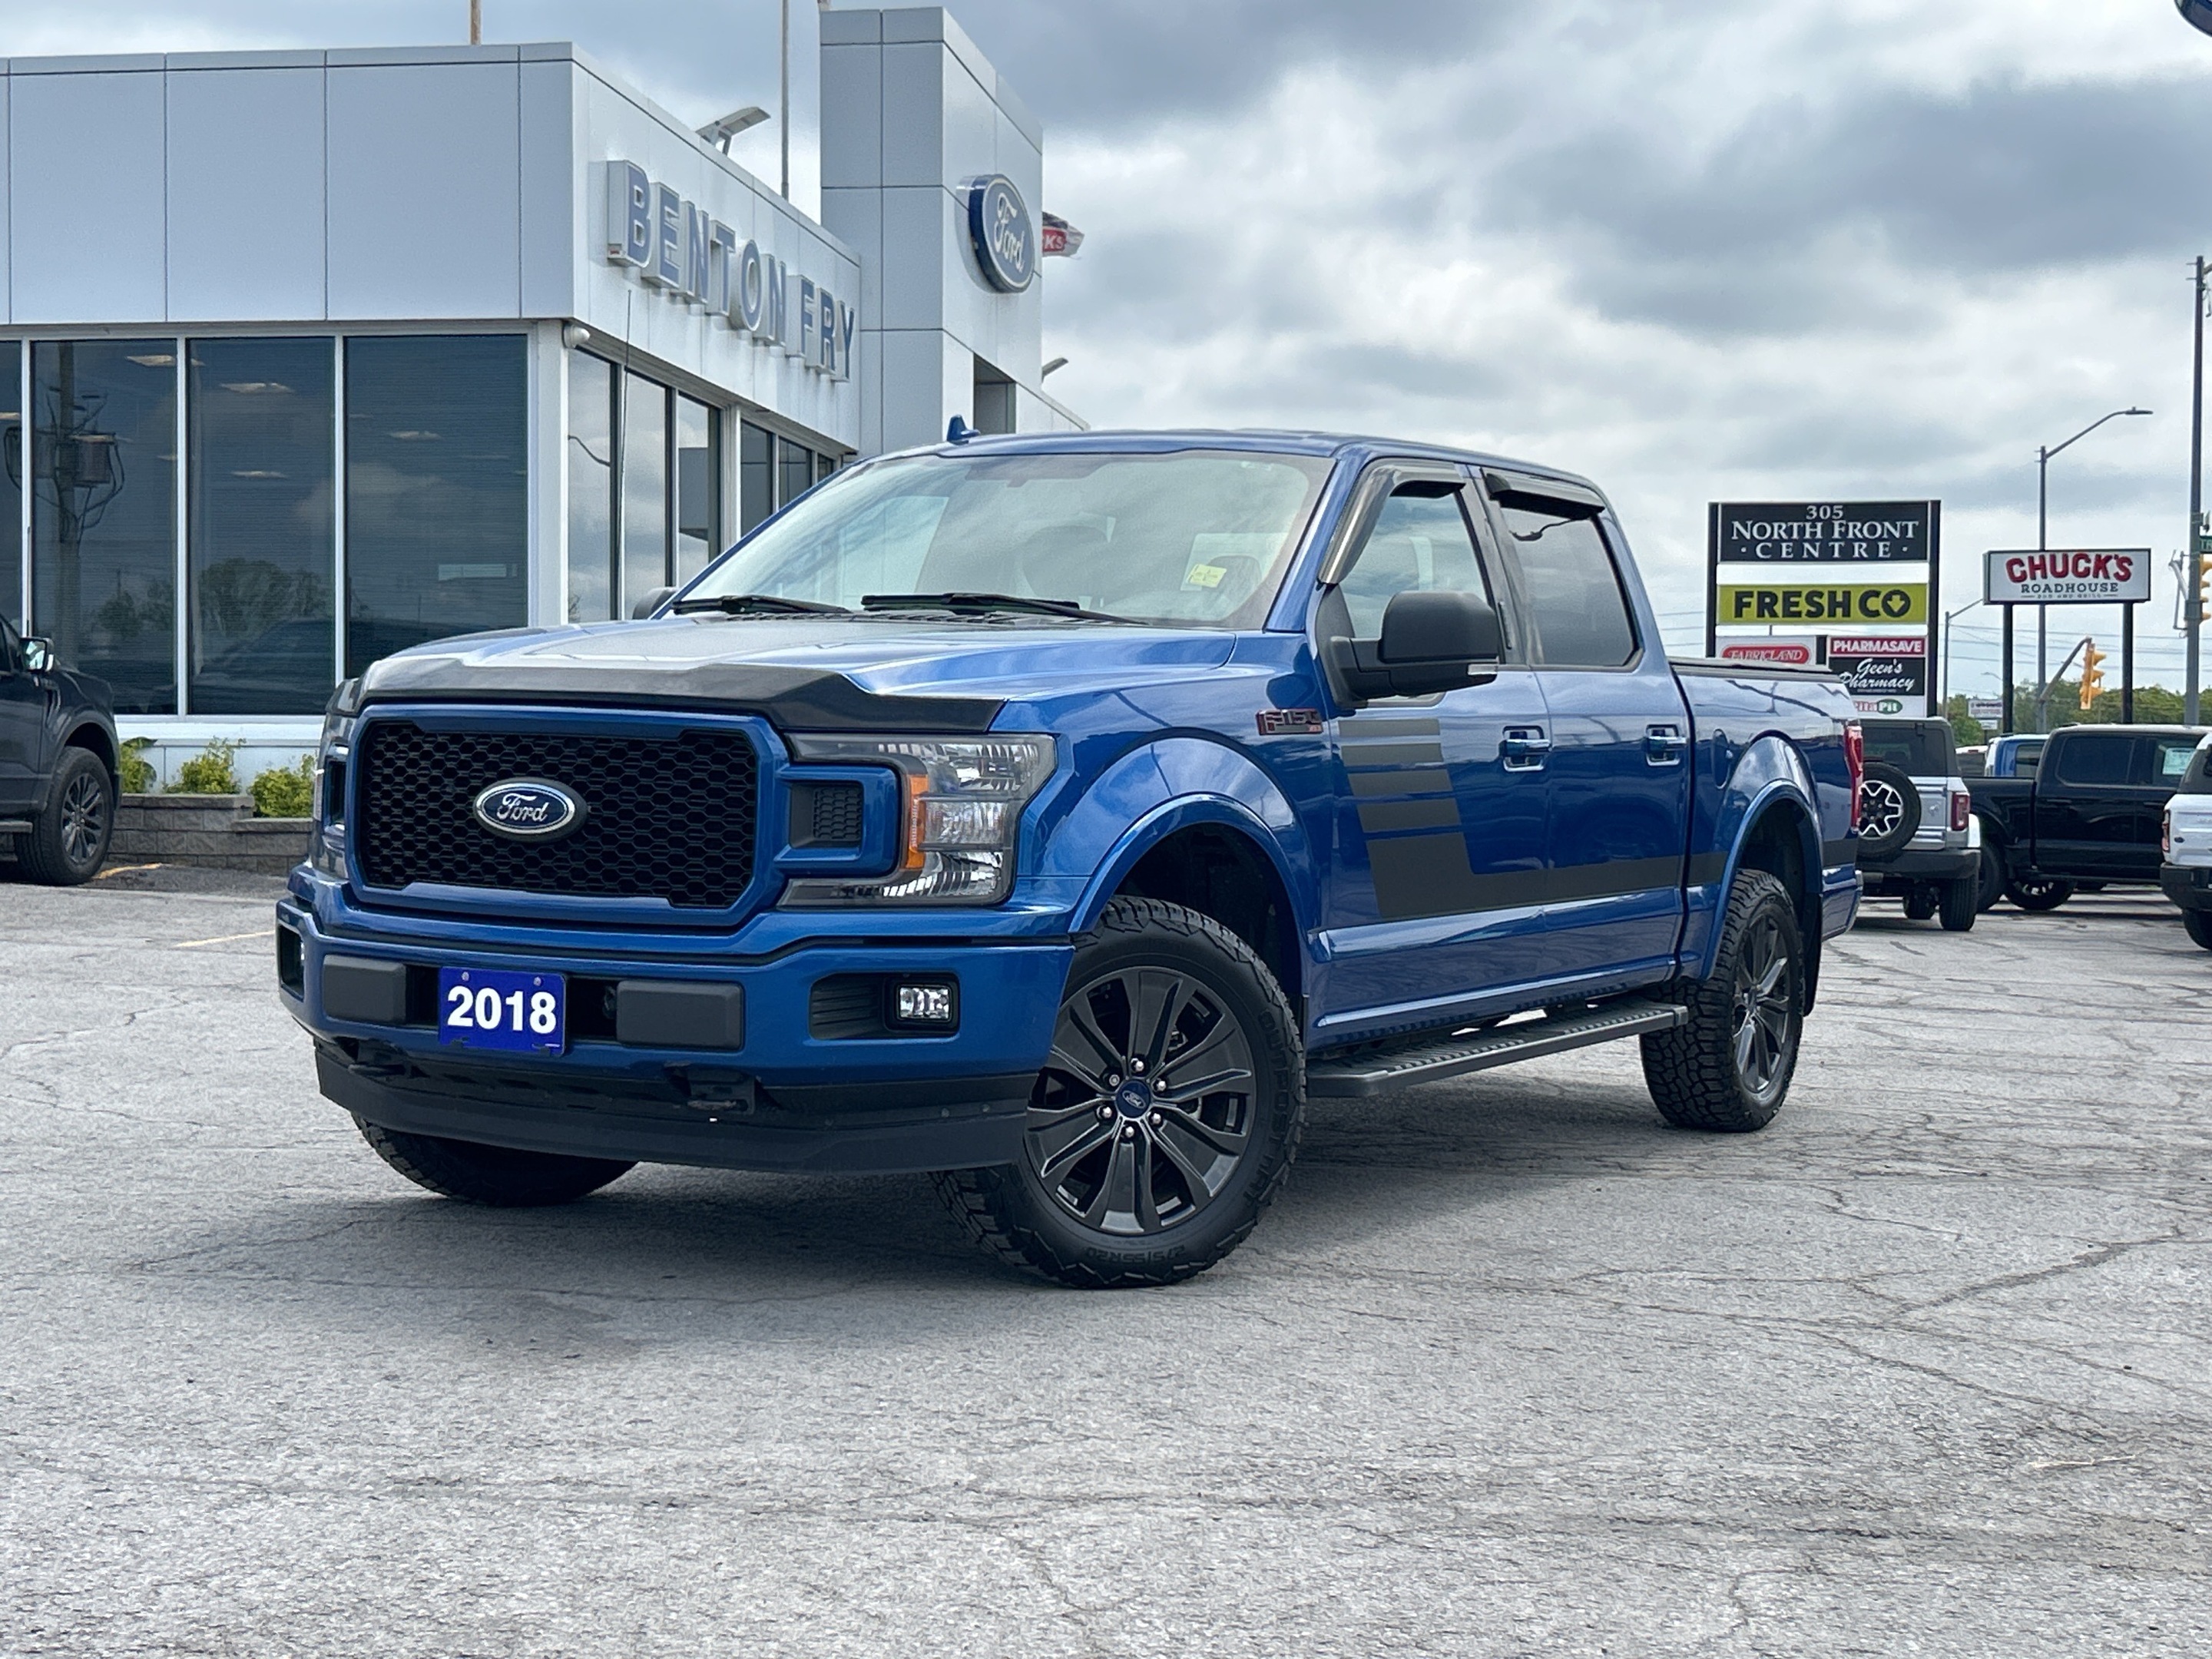 2018 Ford F-150 XLT - Special Edition with 5.0L V8 and Much More